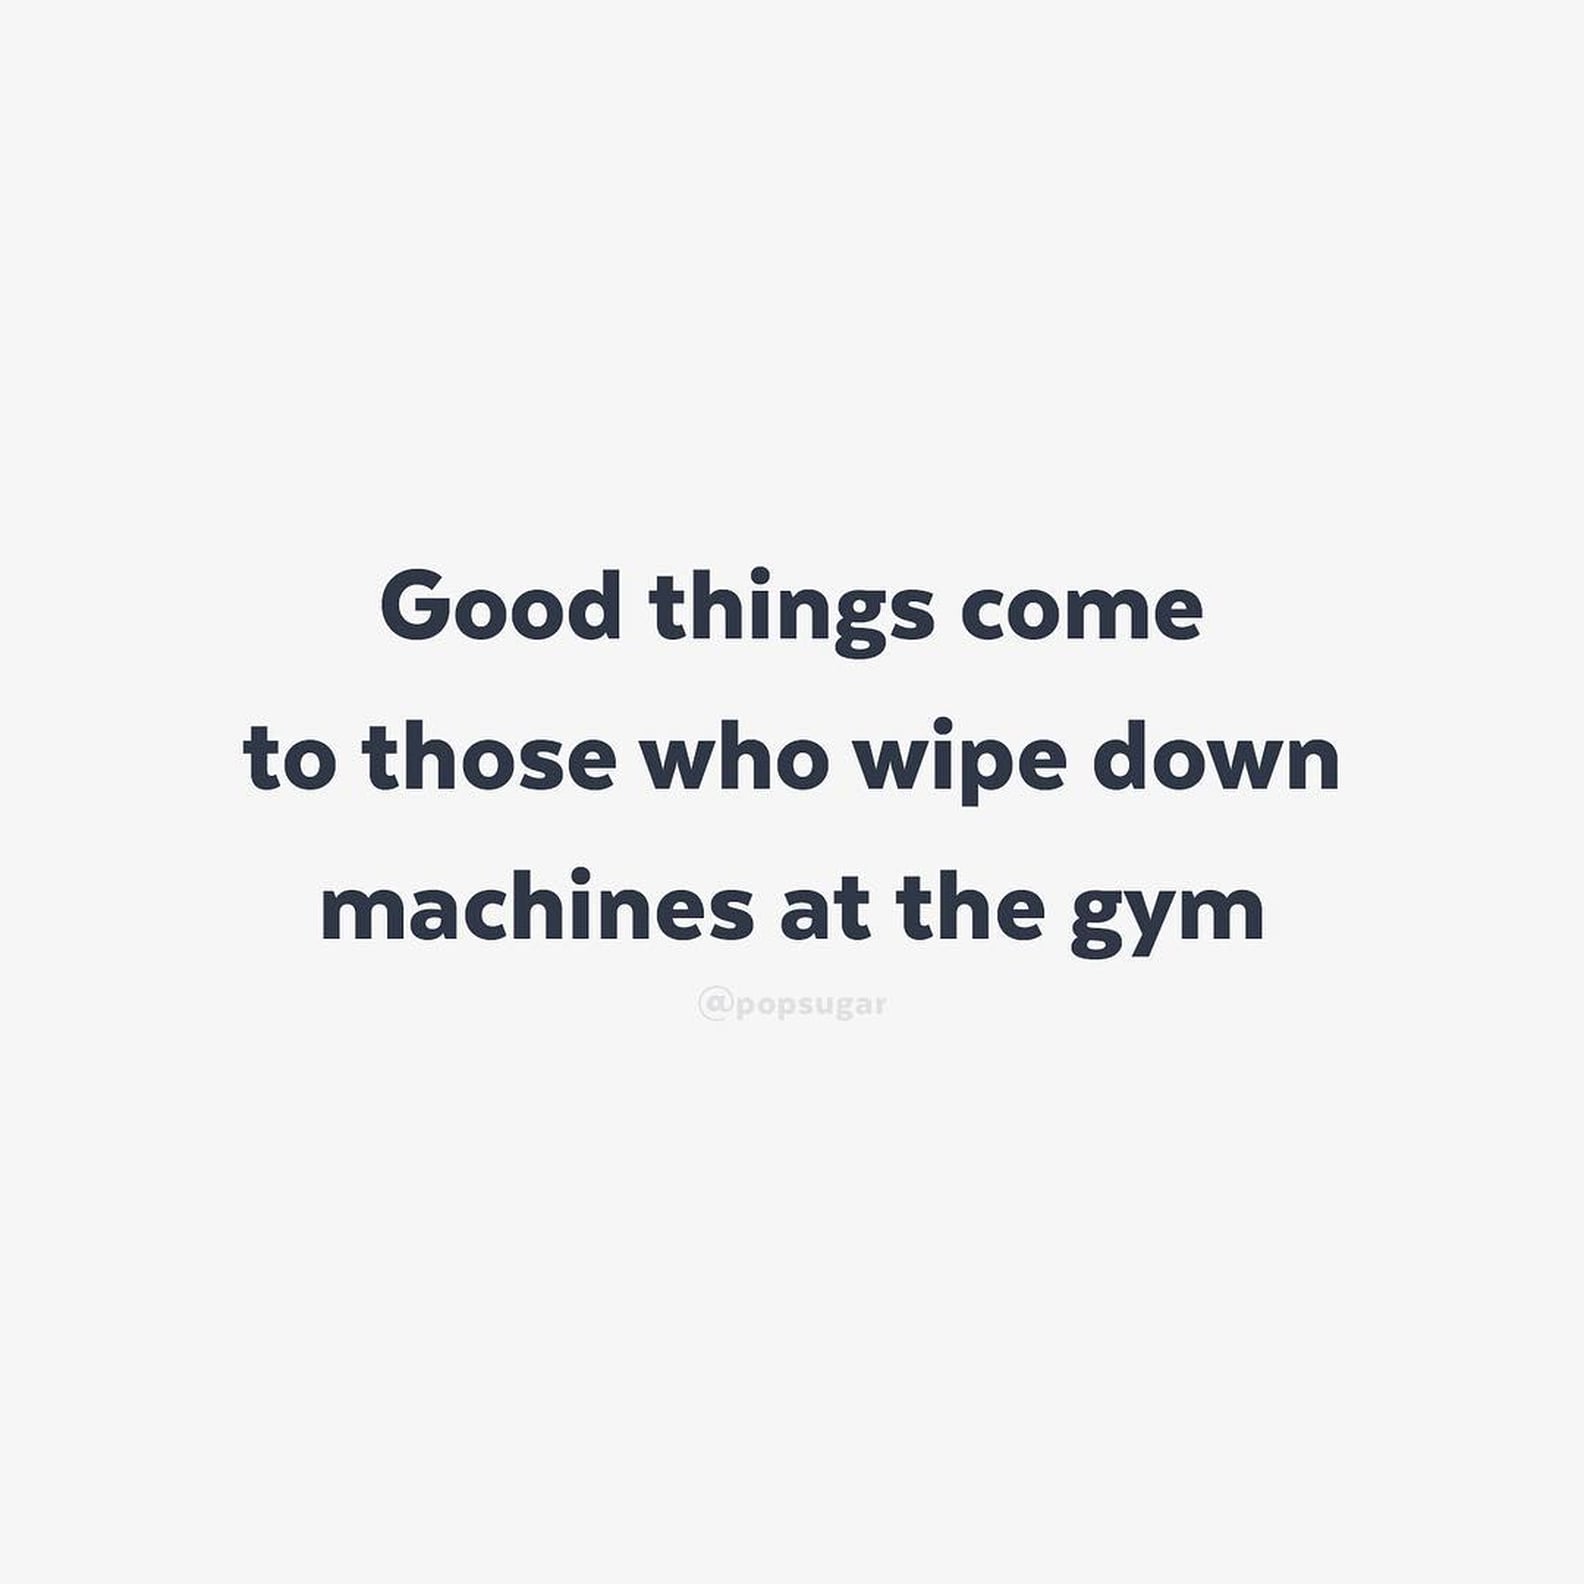 Motivational Fitness Quotes and Memes | POPSUGAR Fitness